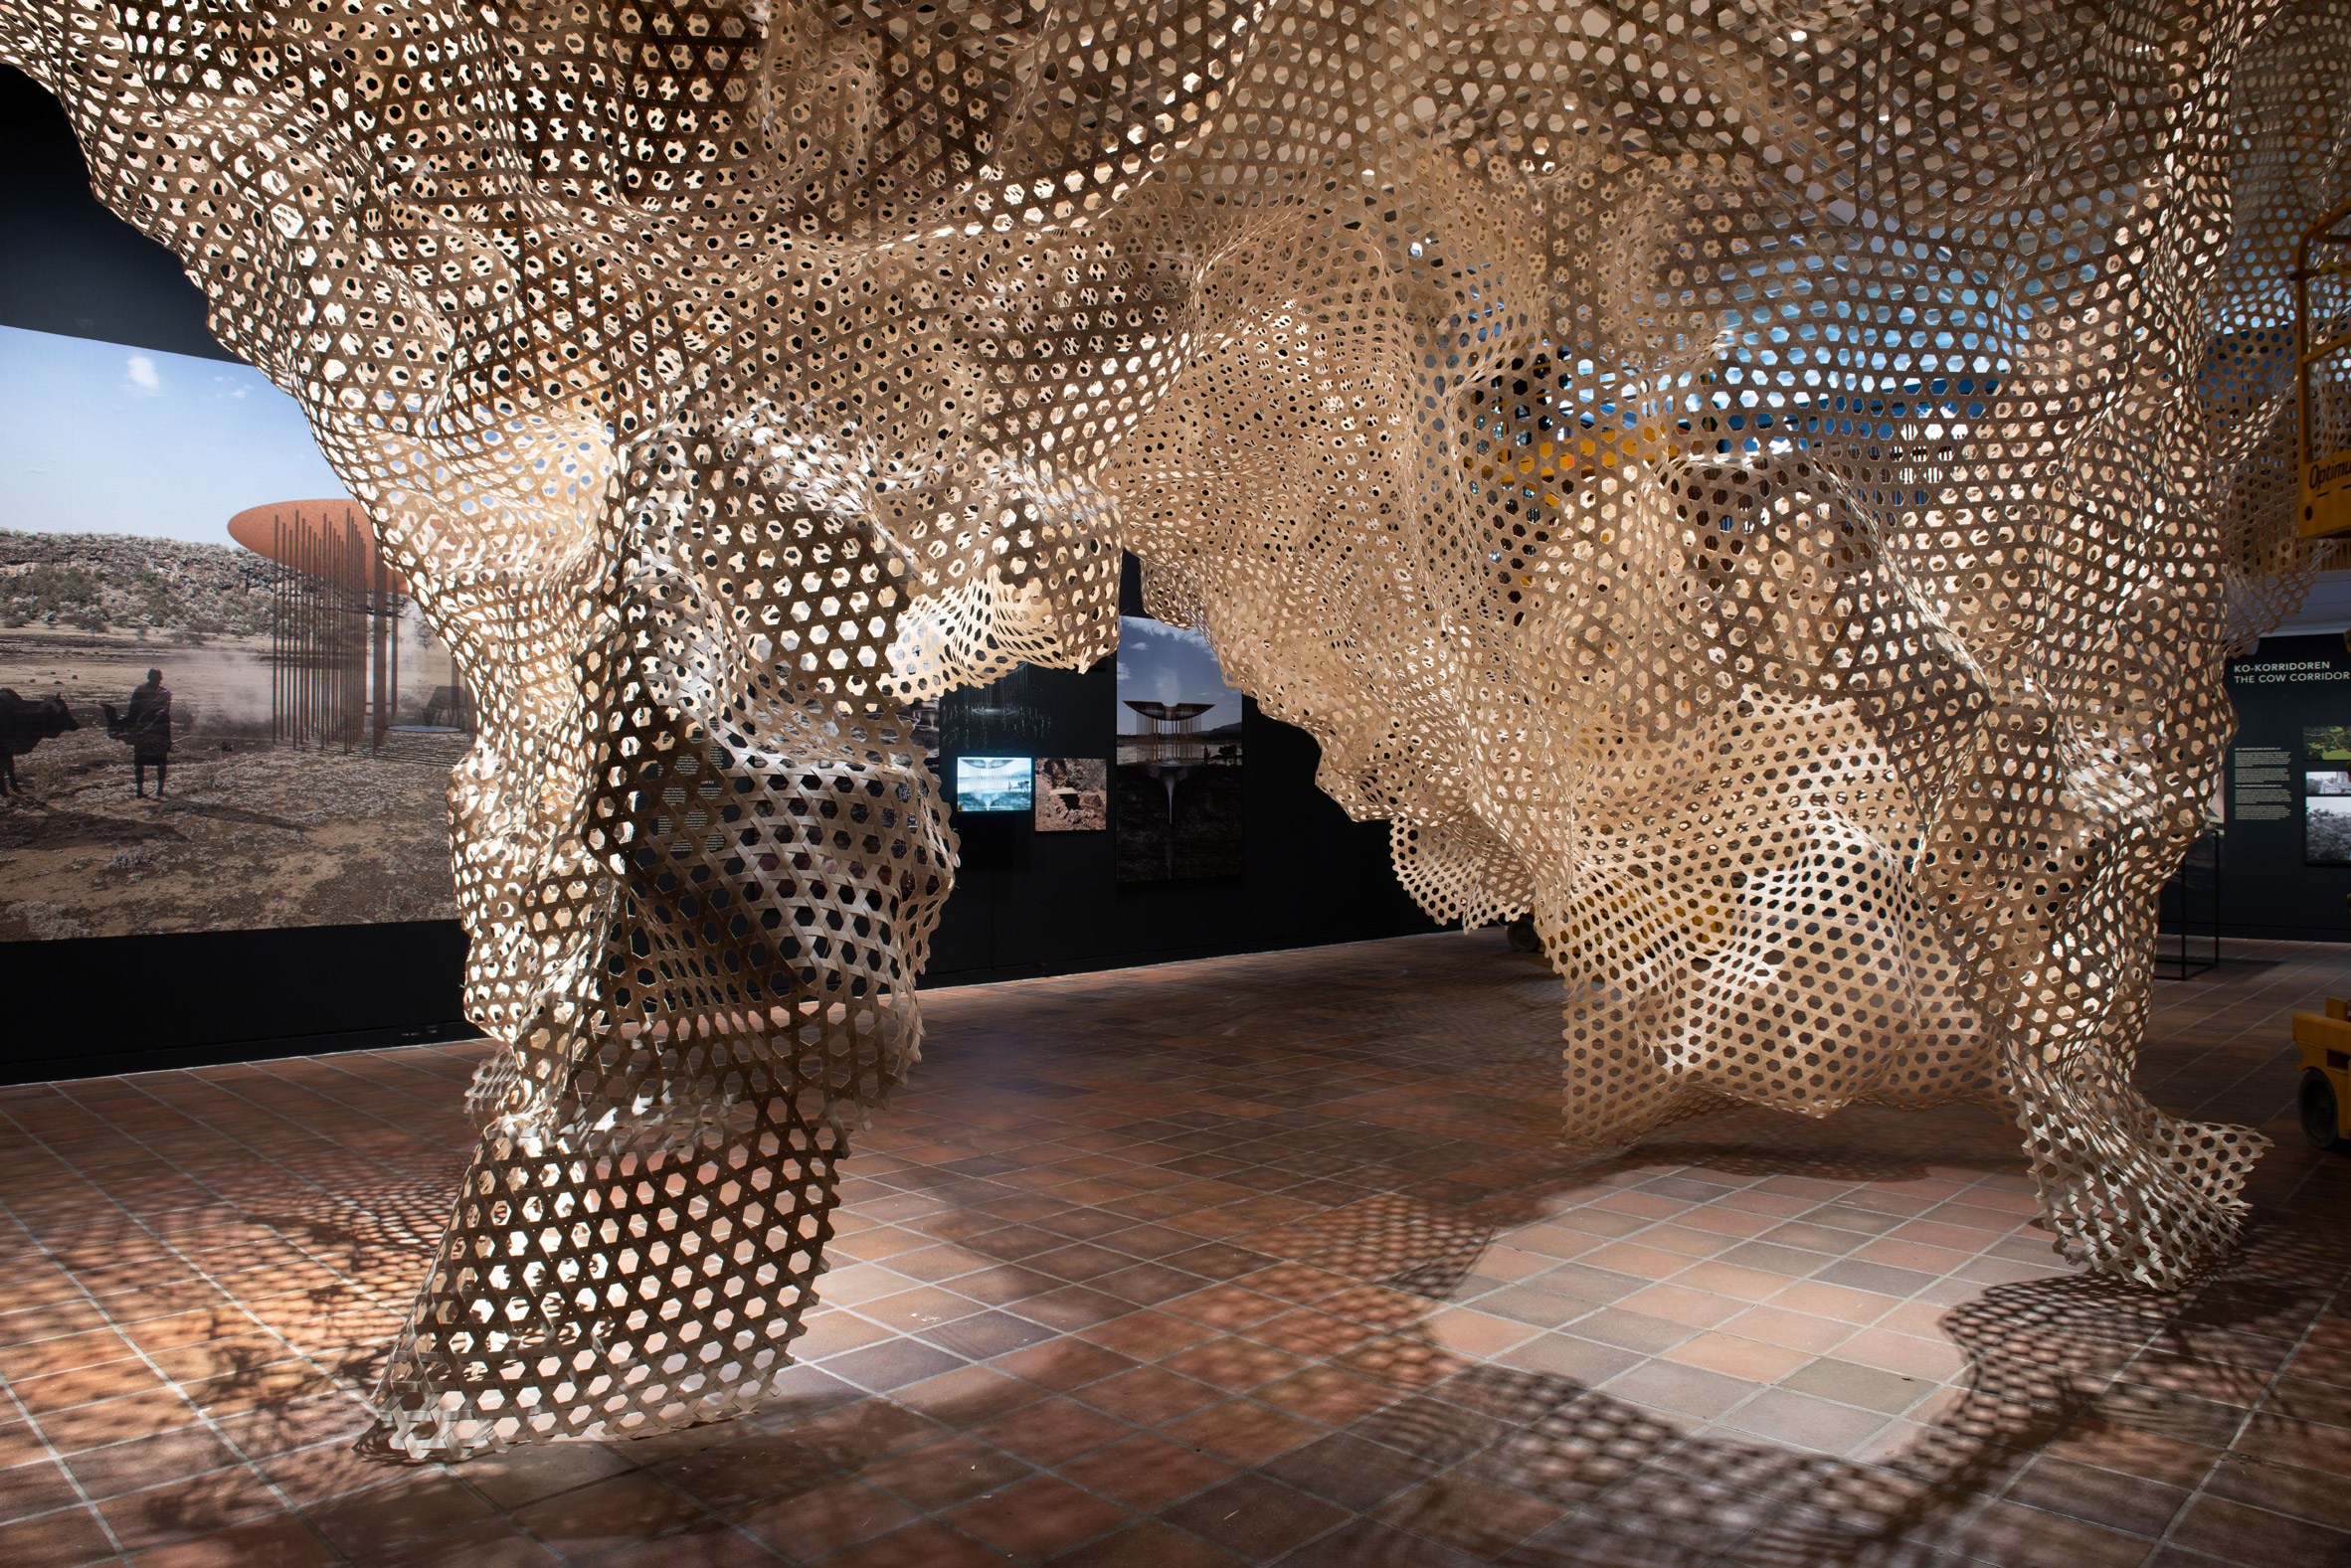 Photograph of the mesh installation informed by the inside of a cave